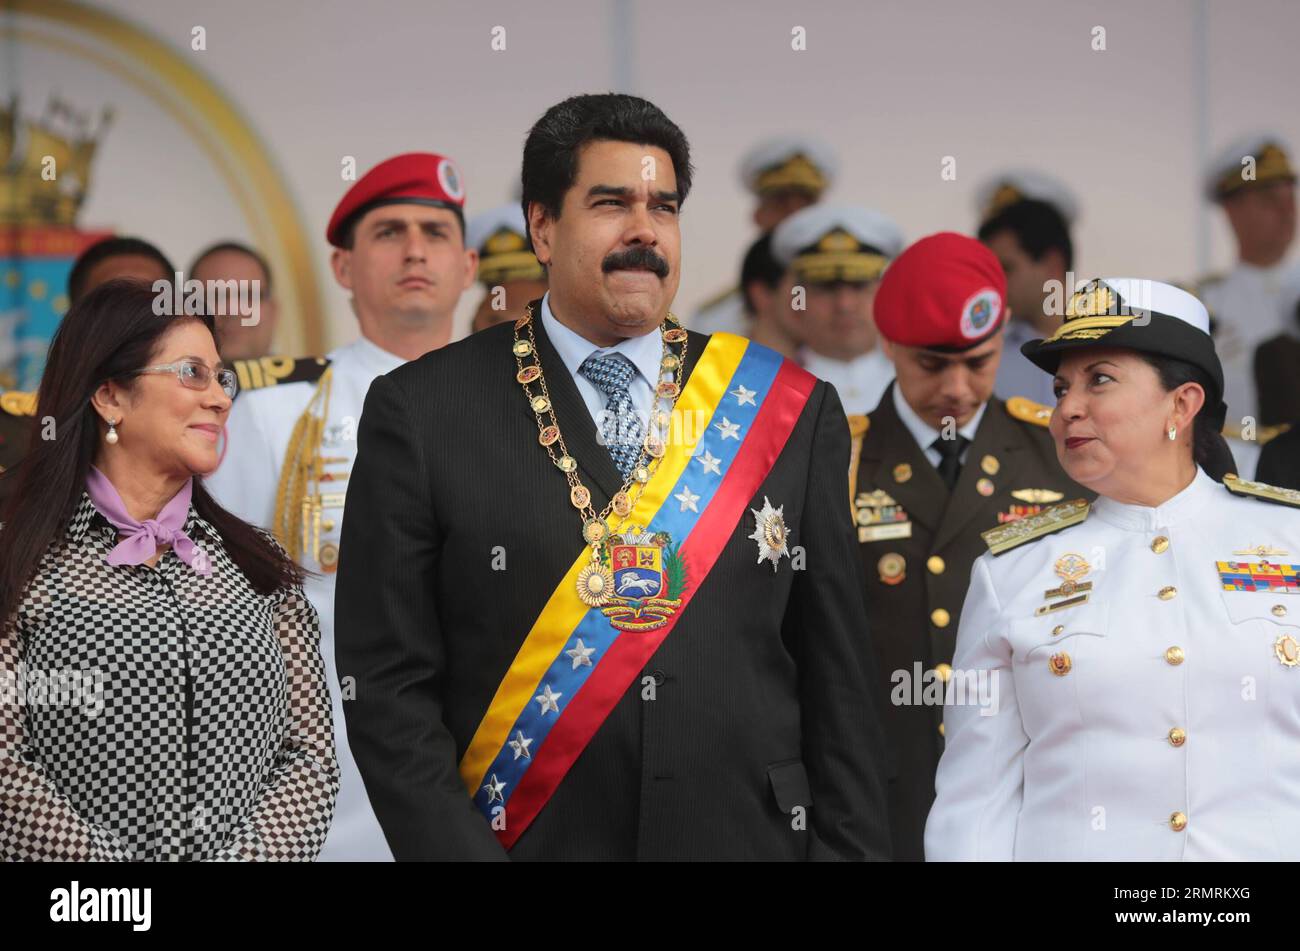 (140725) -- ZULIA, July 25, 2014 (Xinhua) -- Venezuela s President Nicolas Maduro (C) participate in the parade to commemorate the 191st anniversary of the Naval Battle of Maracaibo Lake and the Army Day in Maracaibo, Zulia State, on July 24, 2014. (Xinhua/AVN) (rt) VENEZUELA-ZULIA-PARADE PUBLICATIONxNOTxINxCHN   July 25 2014 XINHUA Venezuela S President Nicolas Maduro C participate in The Parade to commemorate The  Anniversary of The Naval Battle of Maracaibo Lake and The Army Day in Maracaibo  State ON July 24 2014 XINHUA  RT Venezuela  Parade PUBLICATIONxNOTxINxCHN Stock Photo